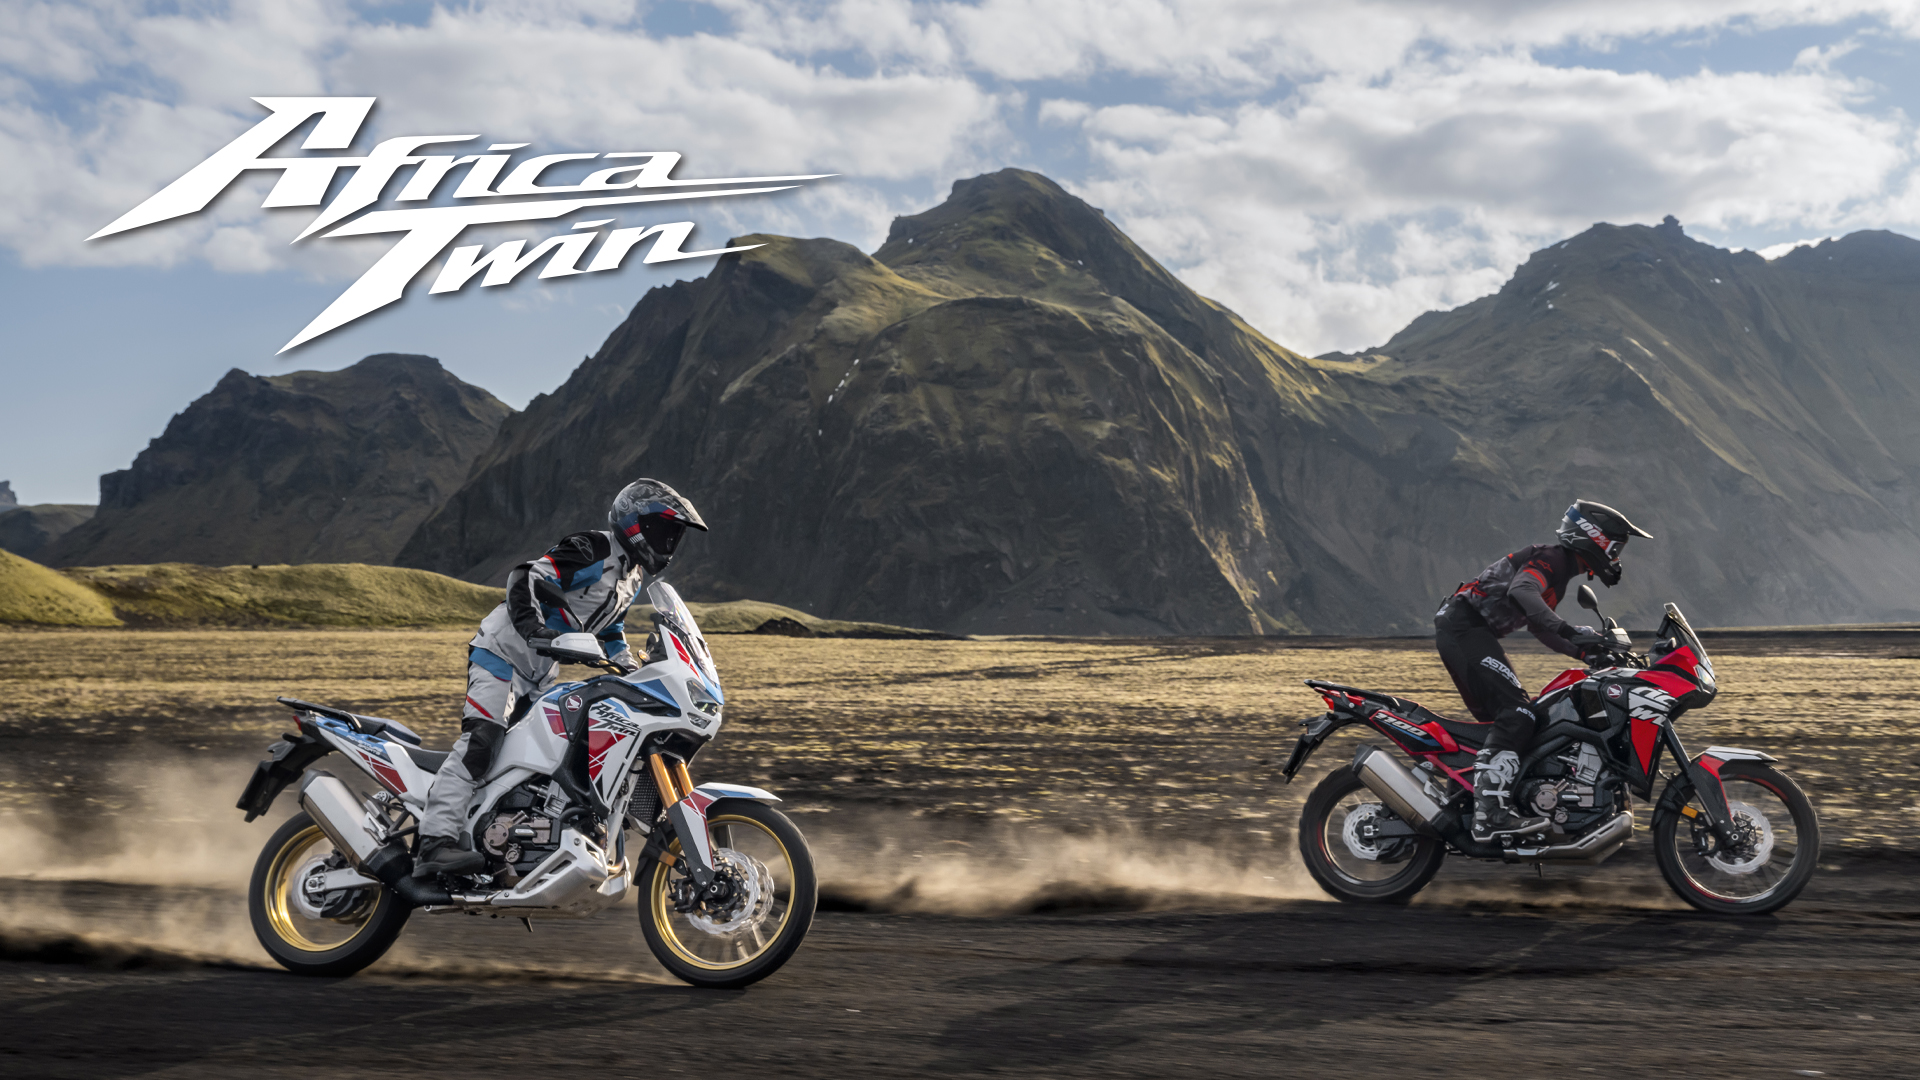 CRF1100L AfricaTwin